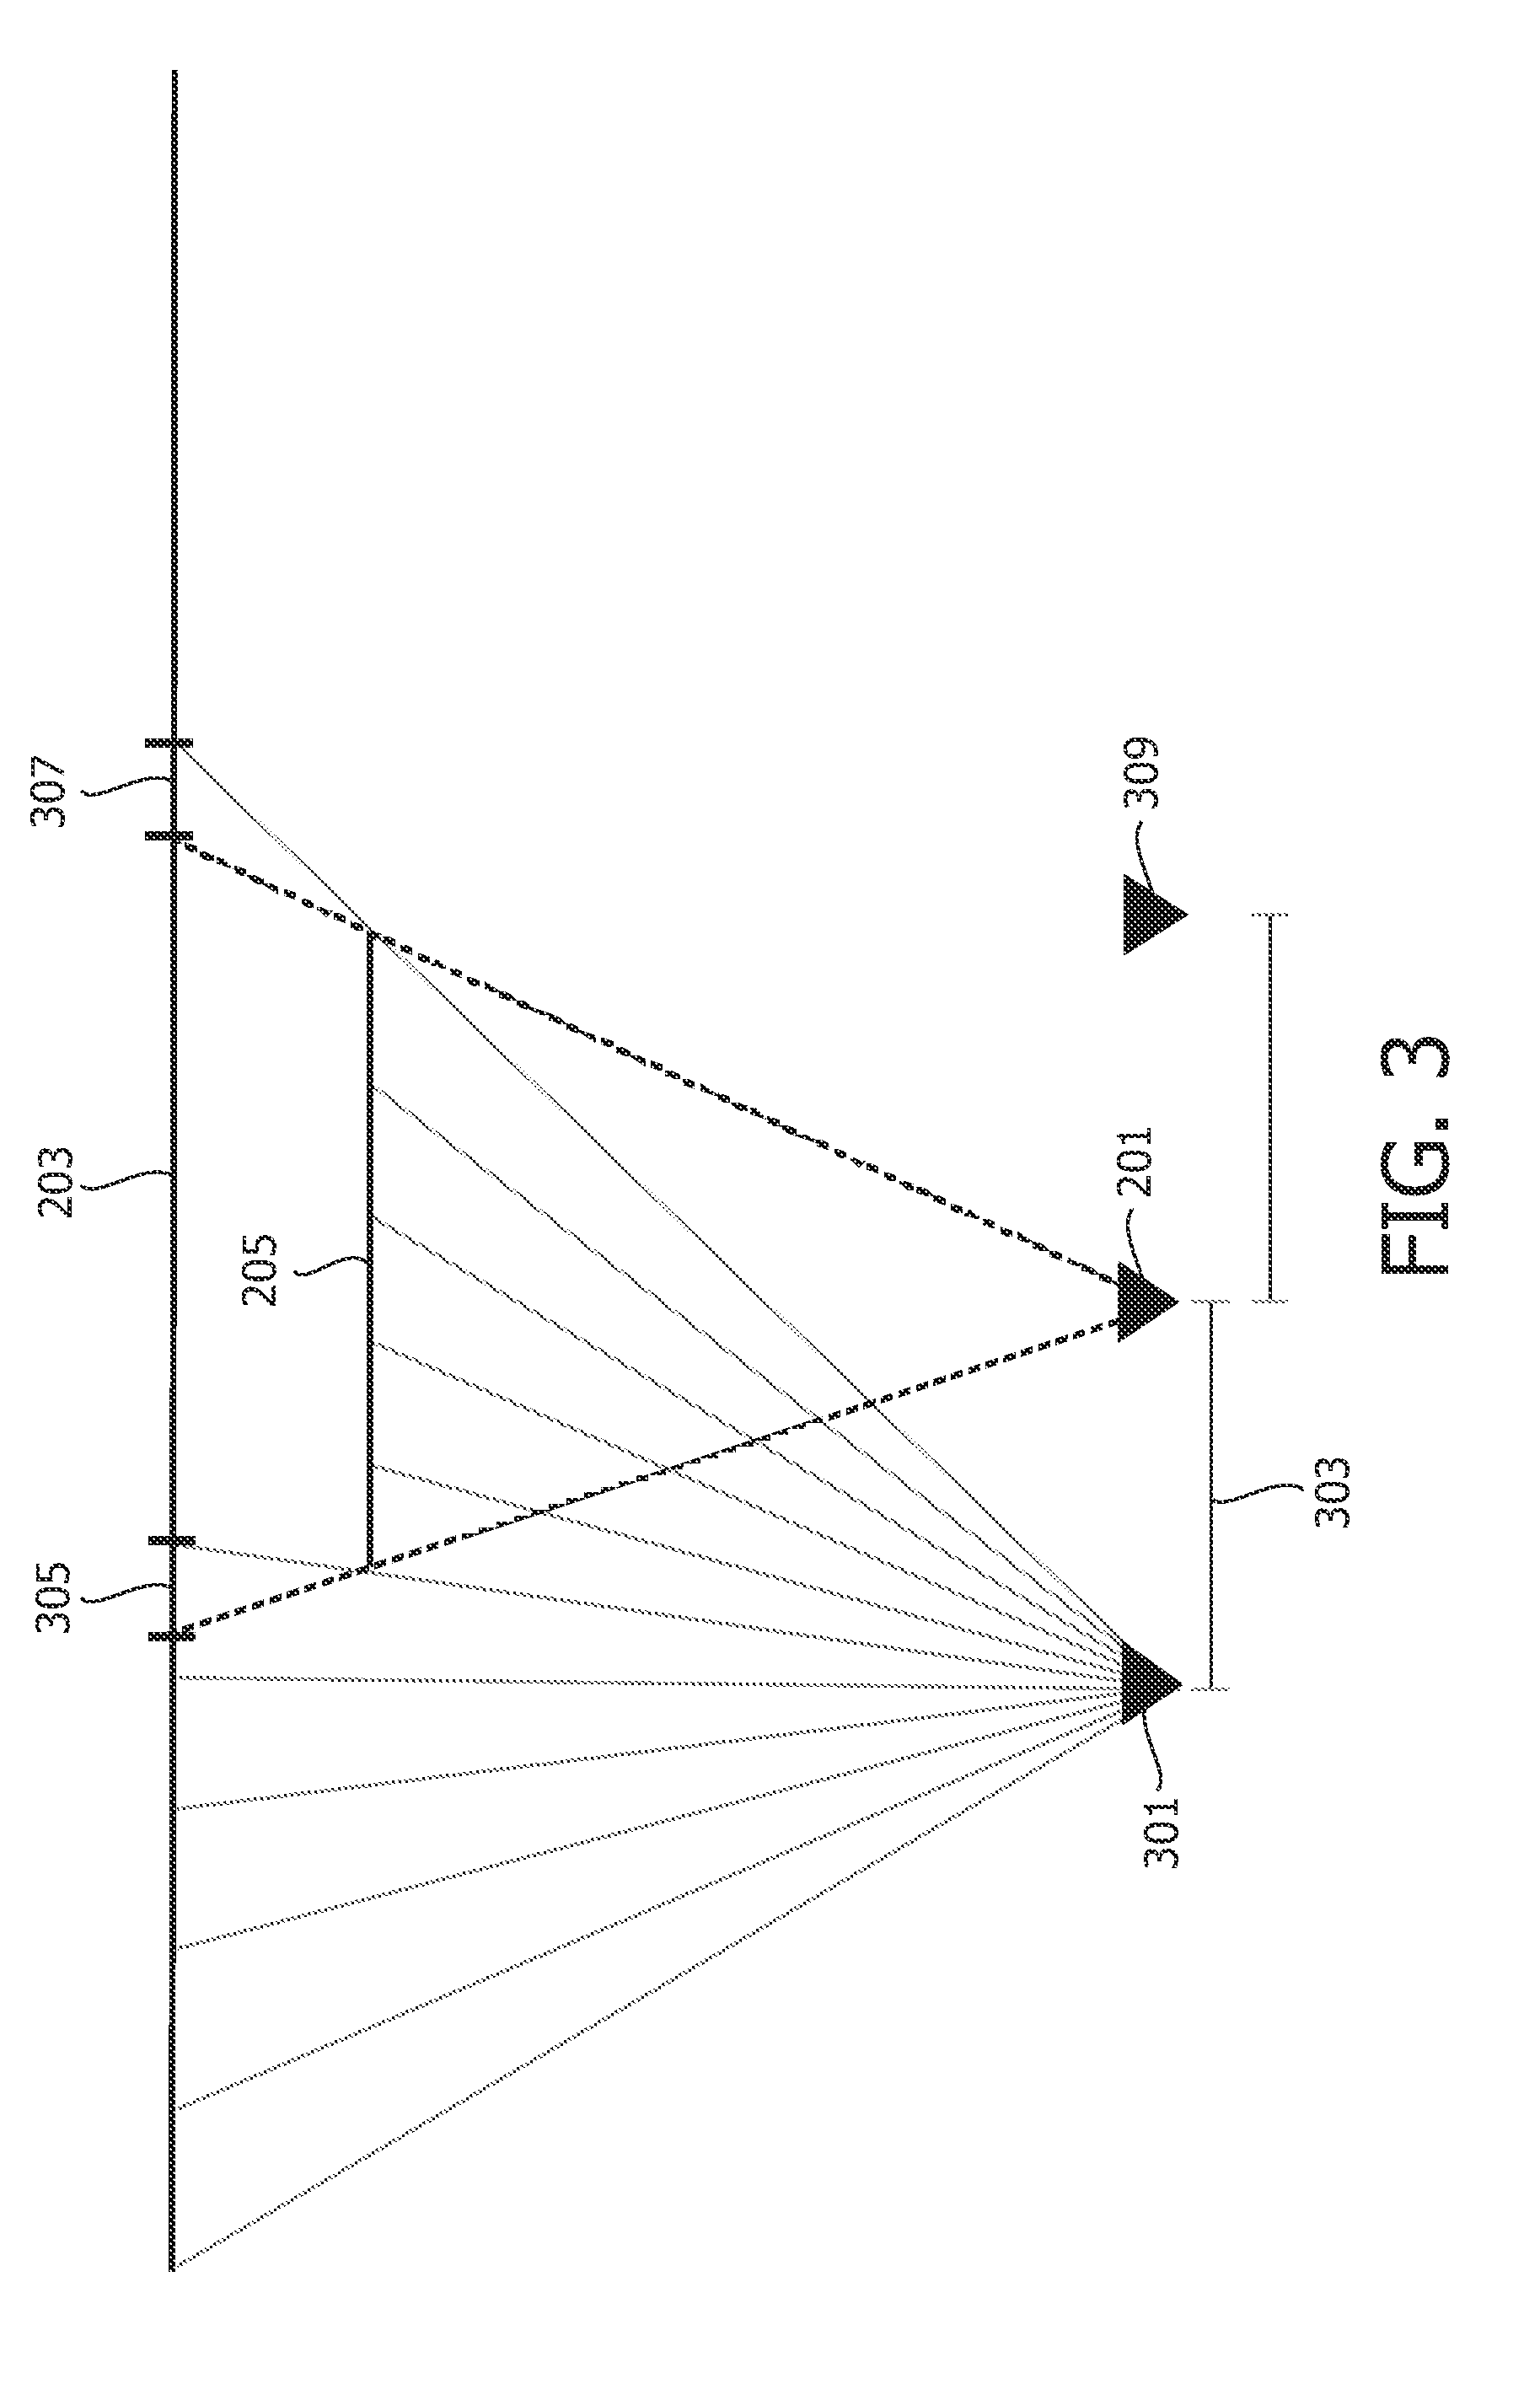 Generation of occlusion data for image properties